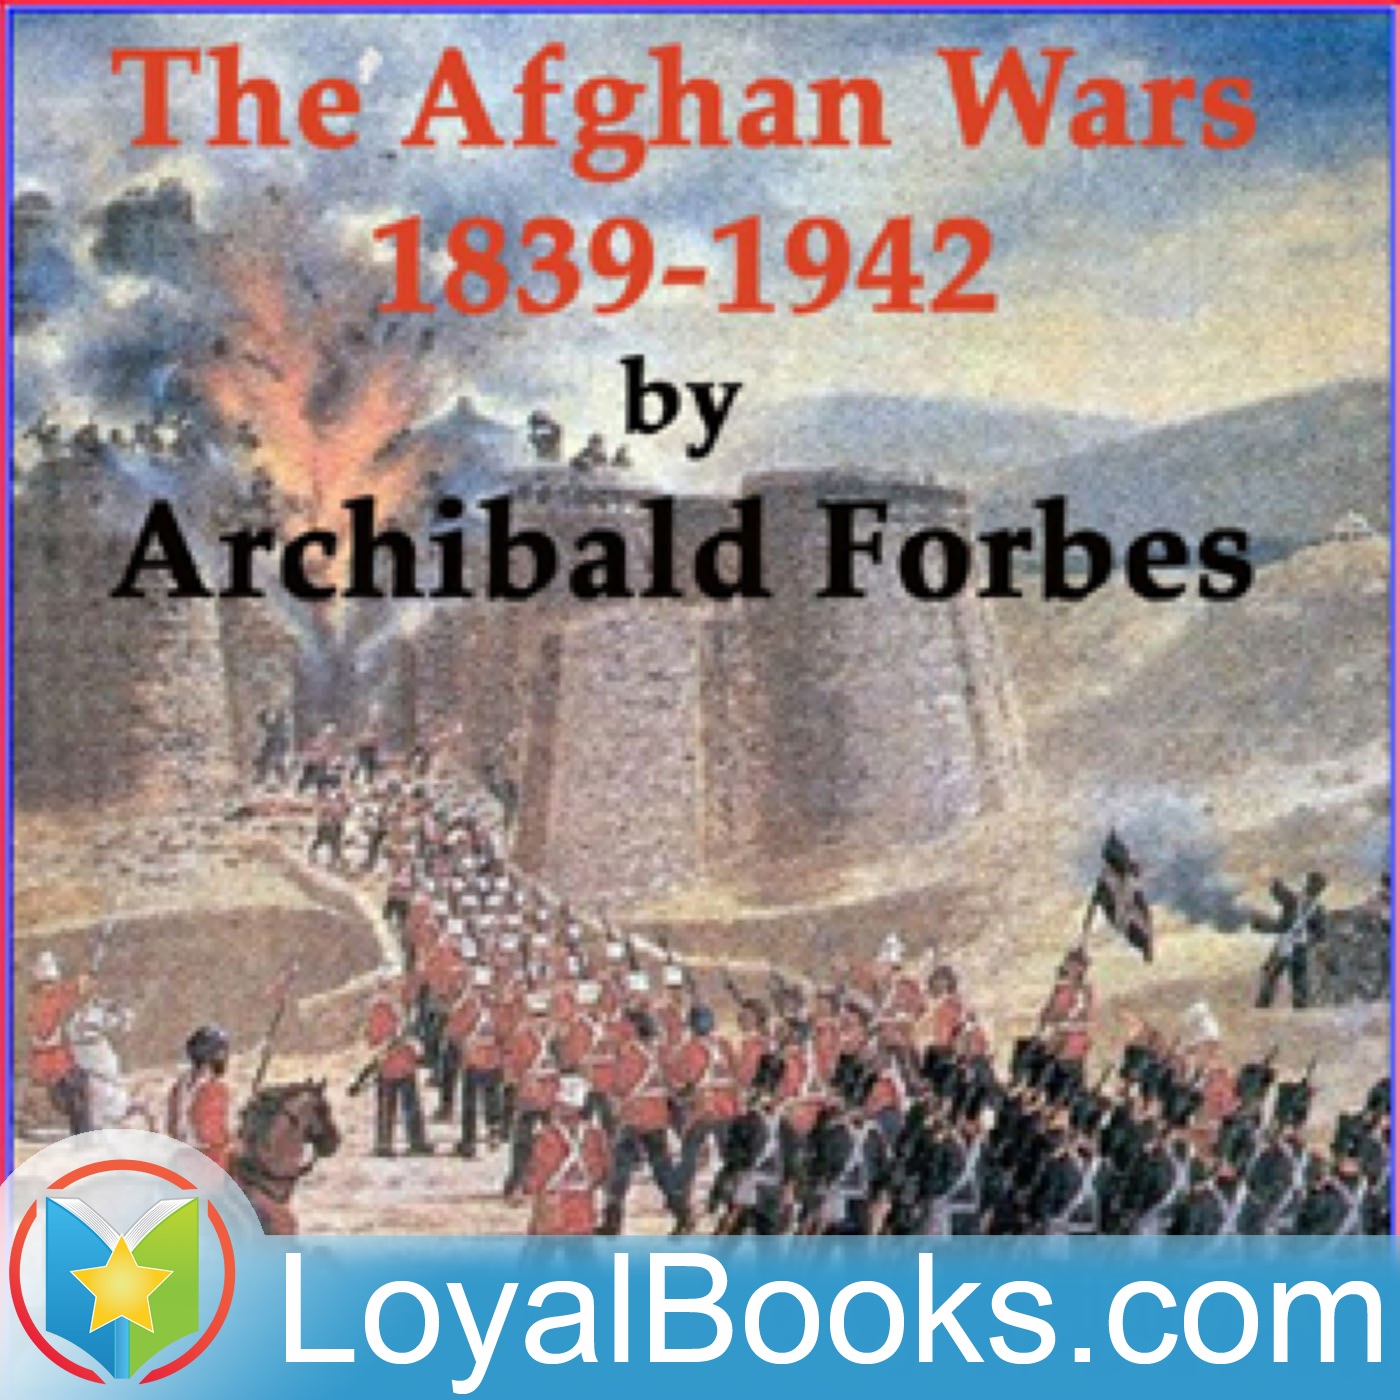 The Afghan Wars 1839-42 and 1878-80, Part 1 by Archibald Forbes